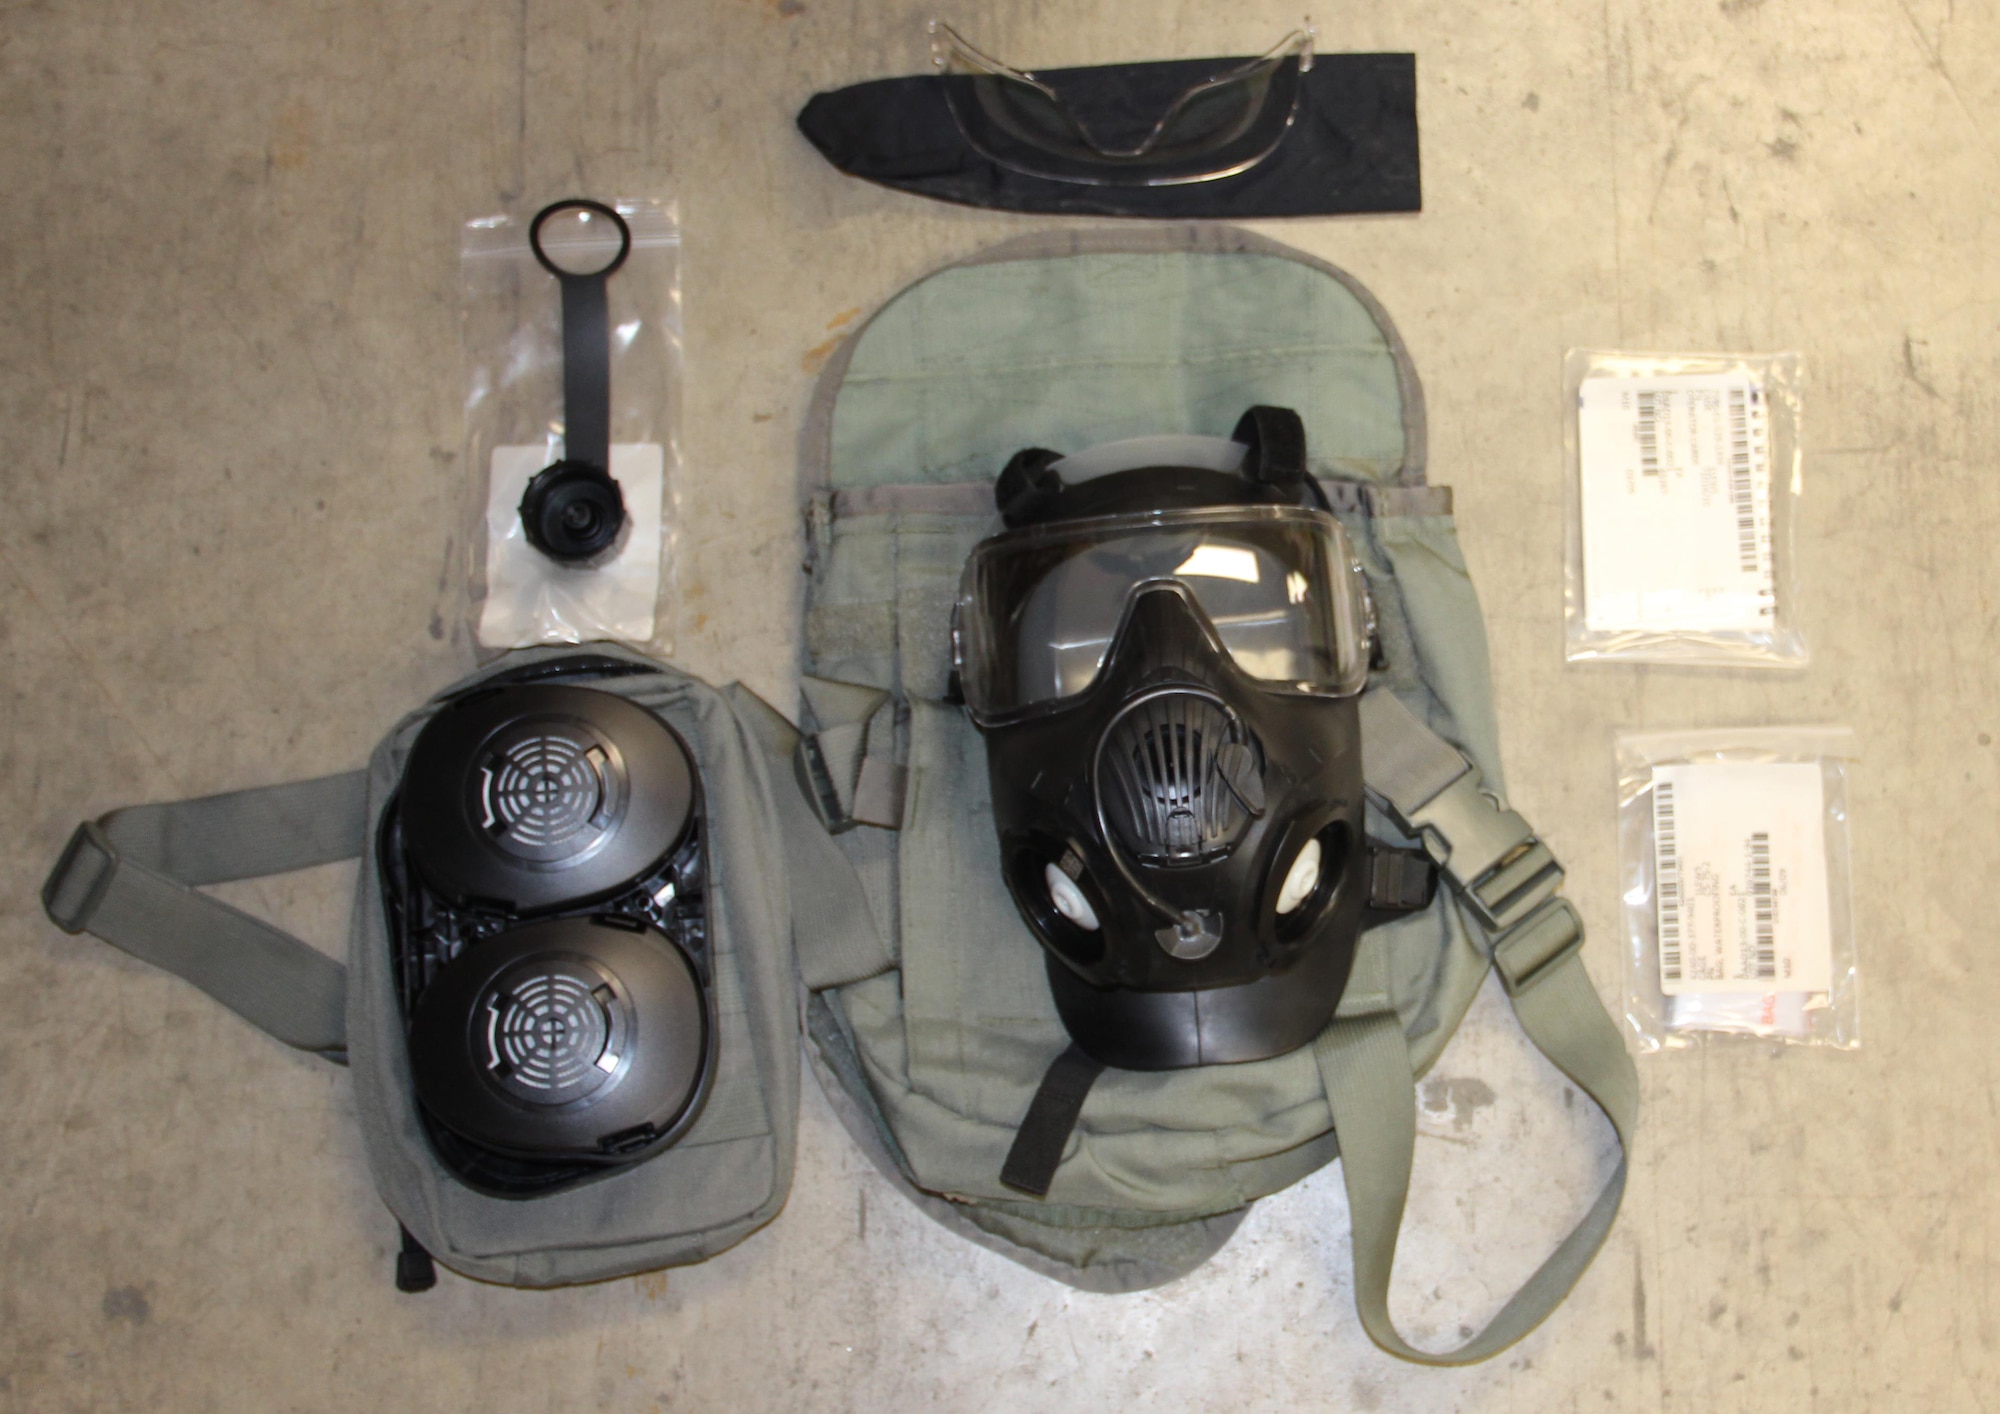 A clean, sanitized, tested mask prior to repackaging and being shipped out to an Airman in the field. (U.S. Air Force photo/Rodney Whaley)